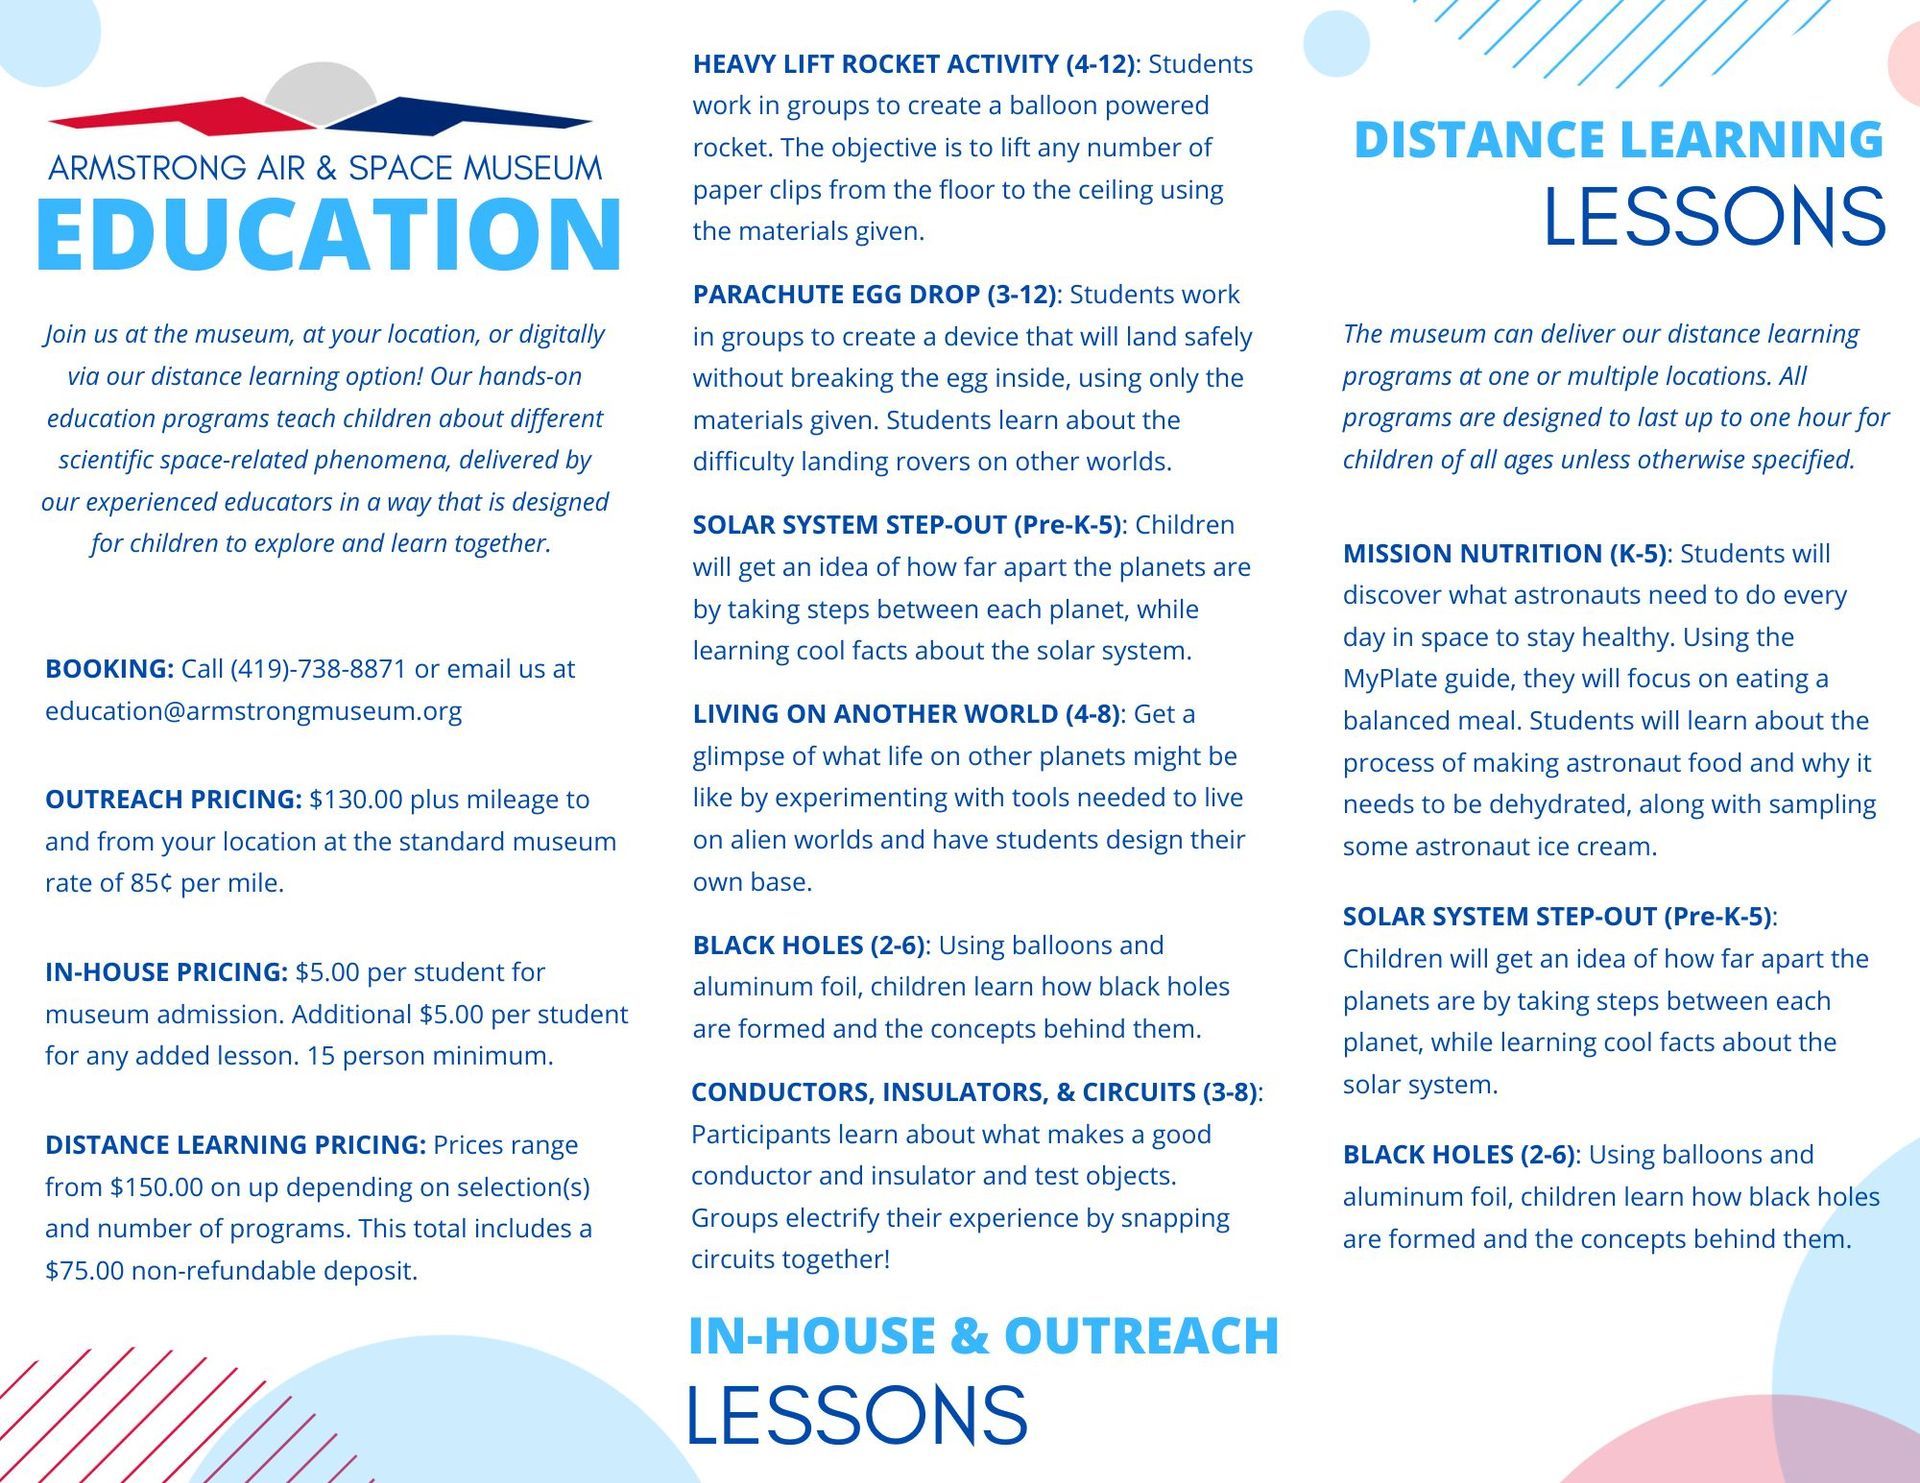 A brochure for distance learning lessons in house and outreach lessons